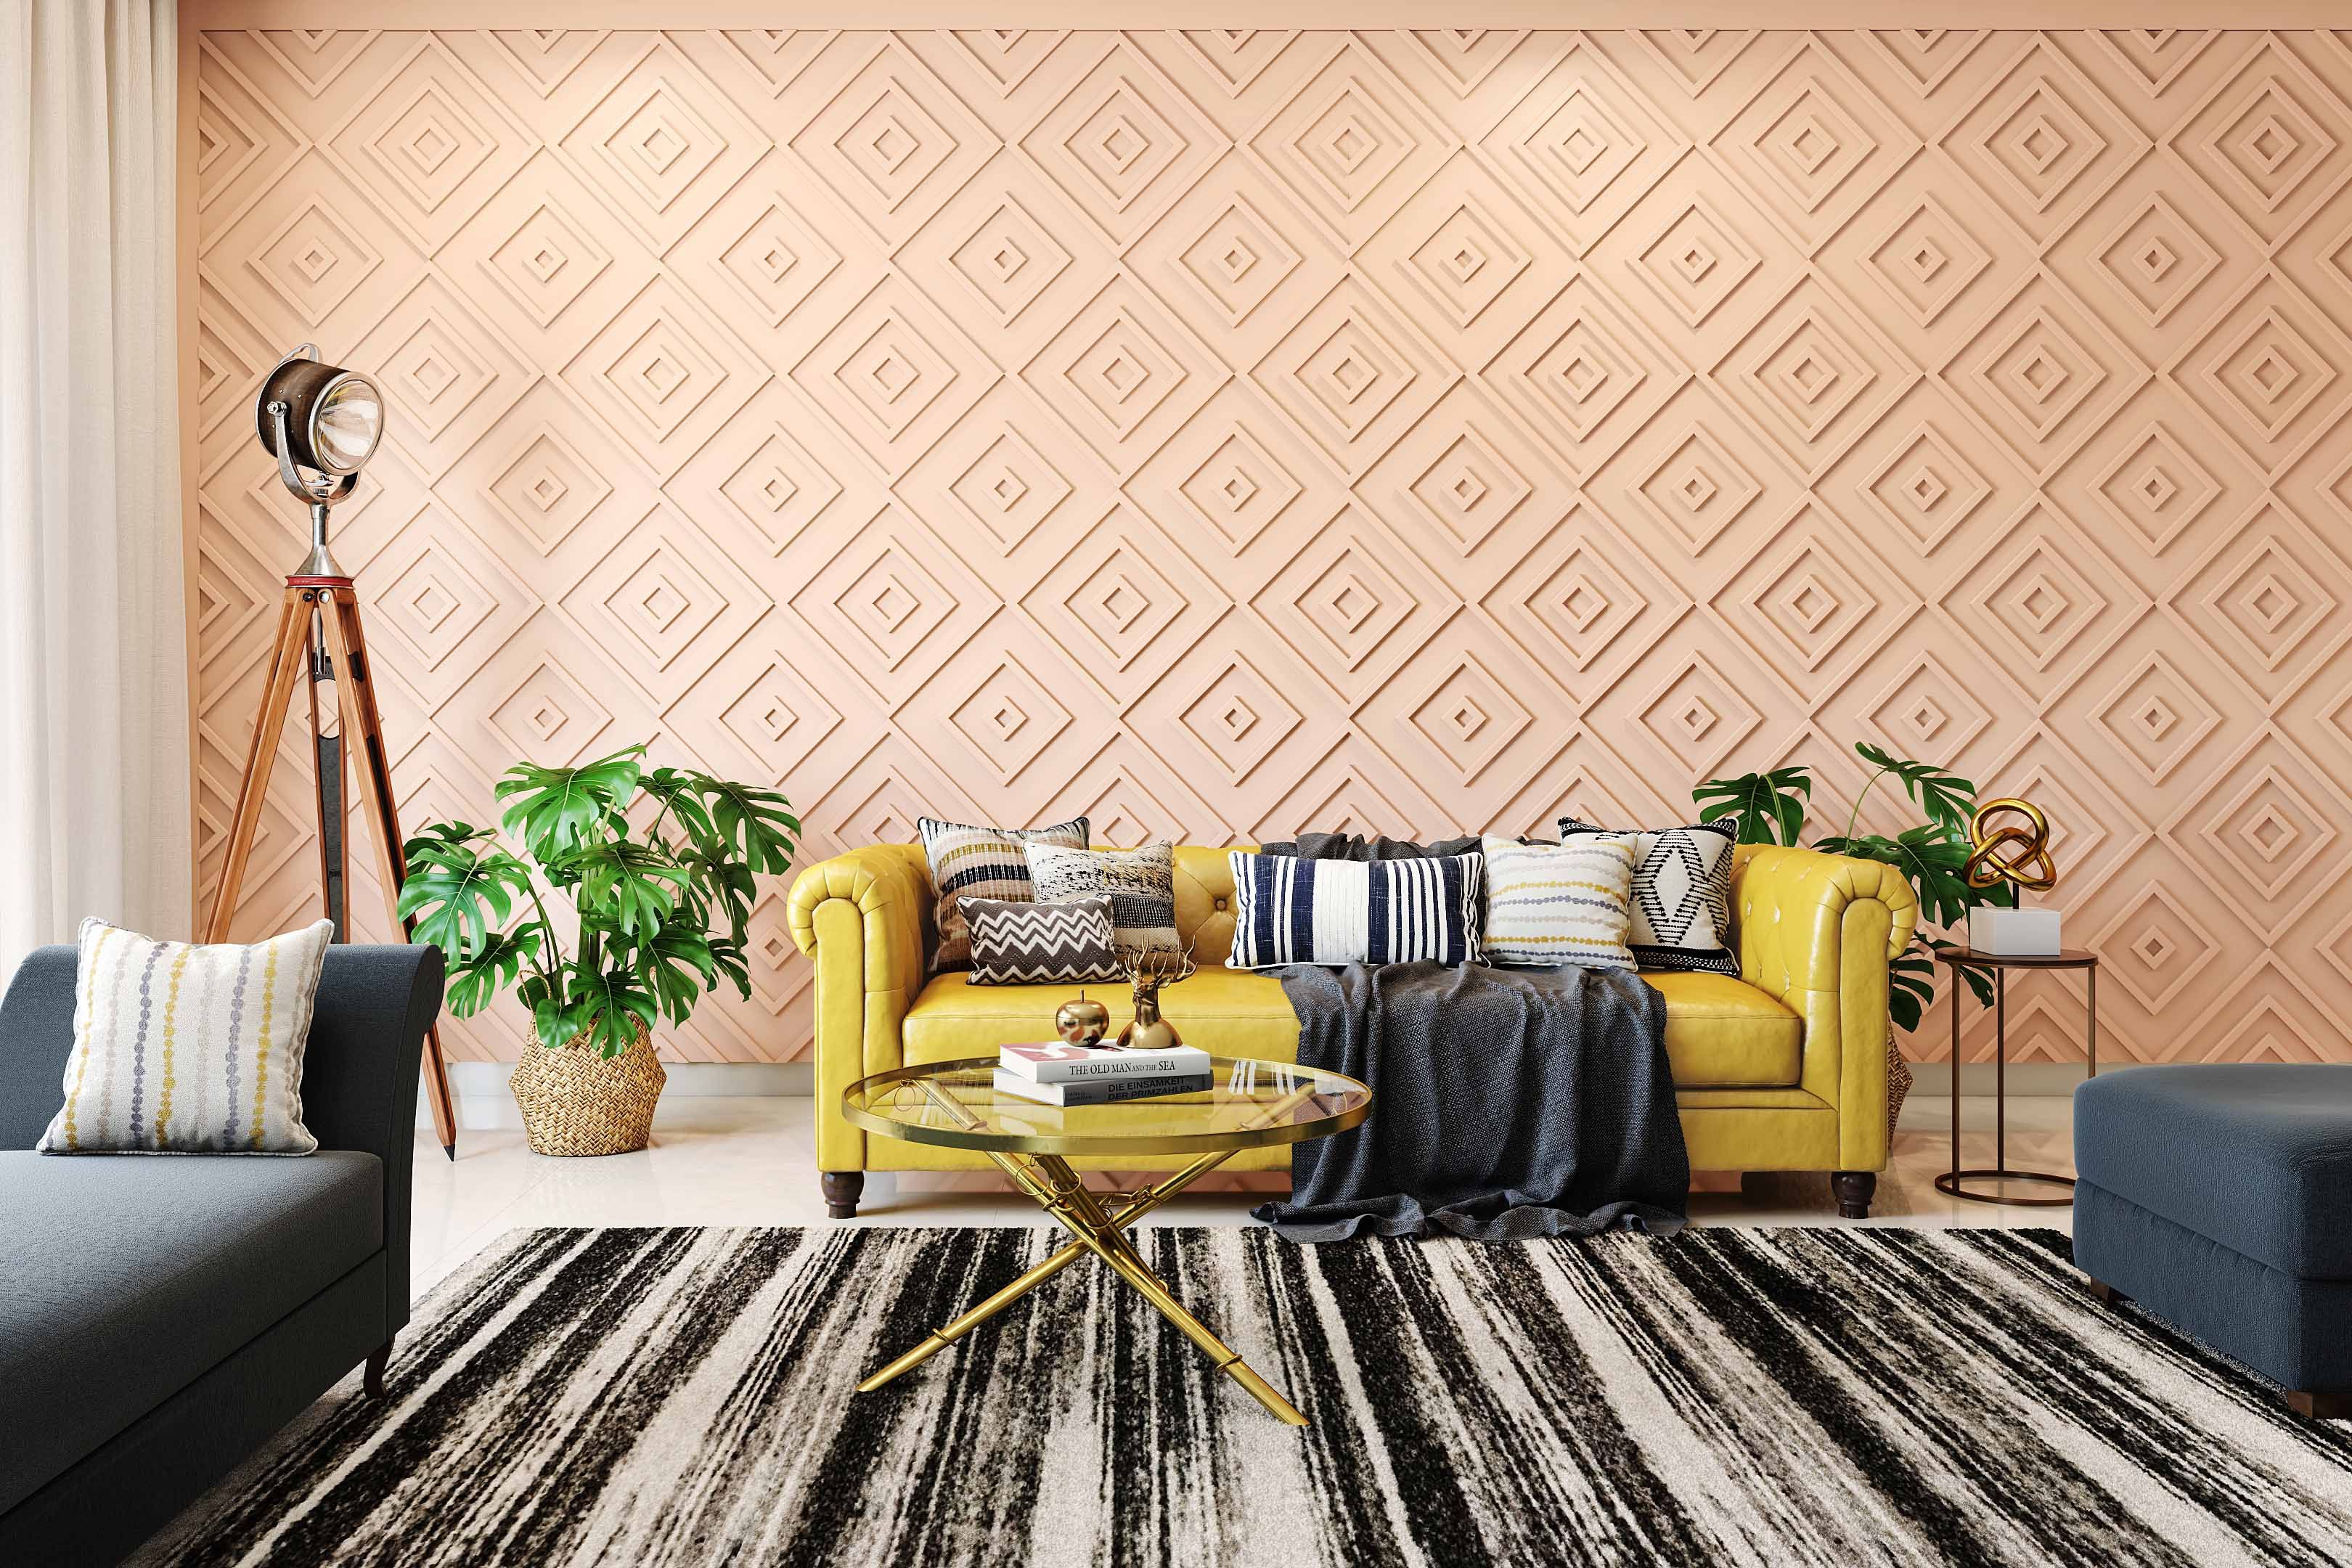 Contemporary Peach Living Room Wall Paint With Concentric Diamond Patterning